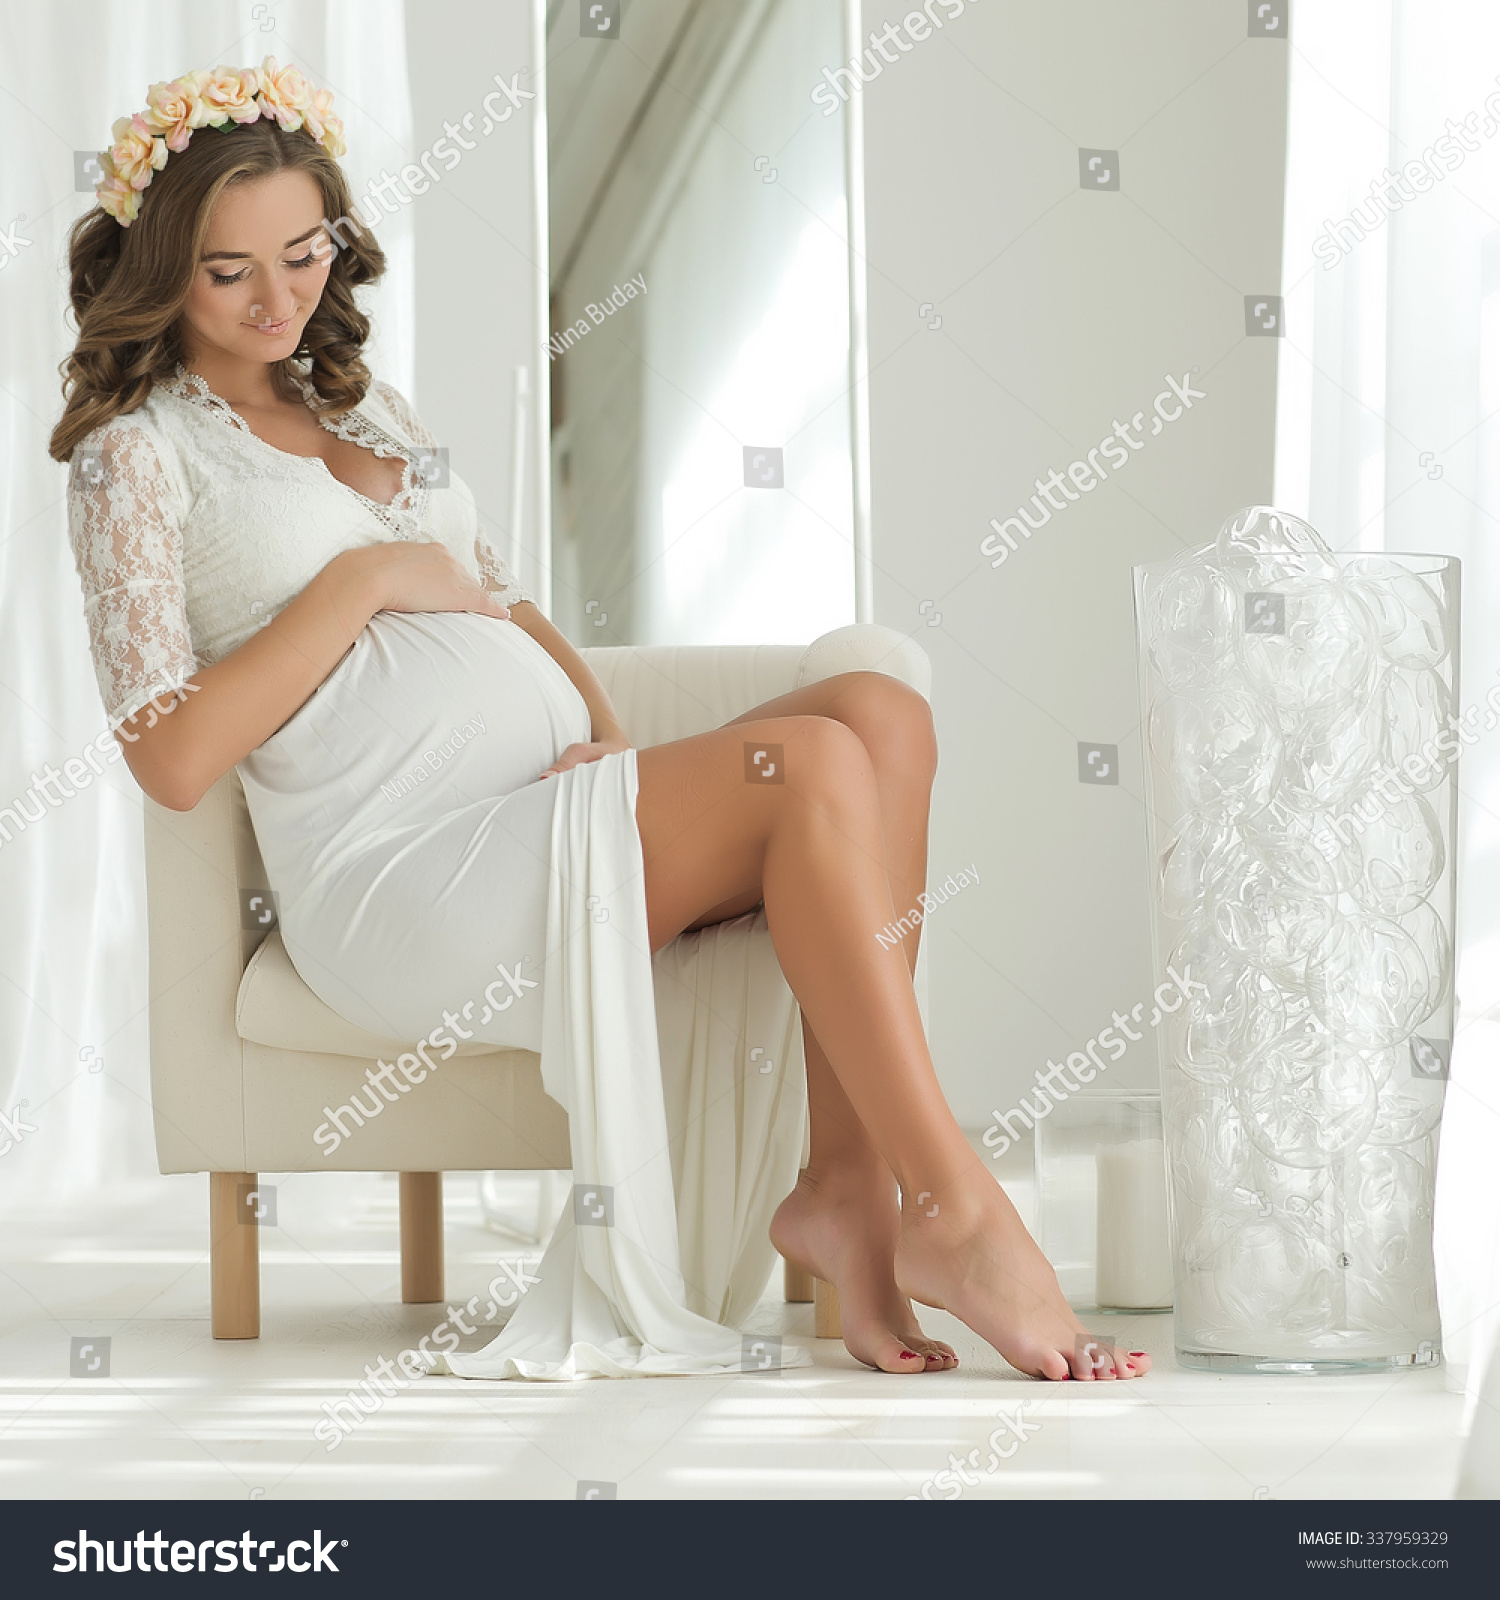 Portrait Young Pregnant Woman Stock Photo 337959329 - Shutterstock